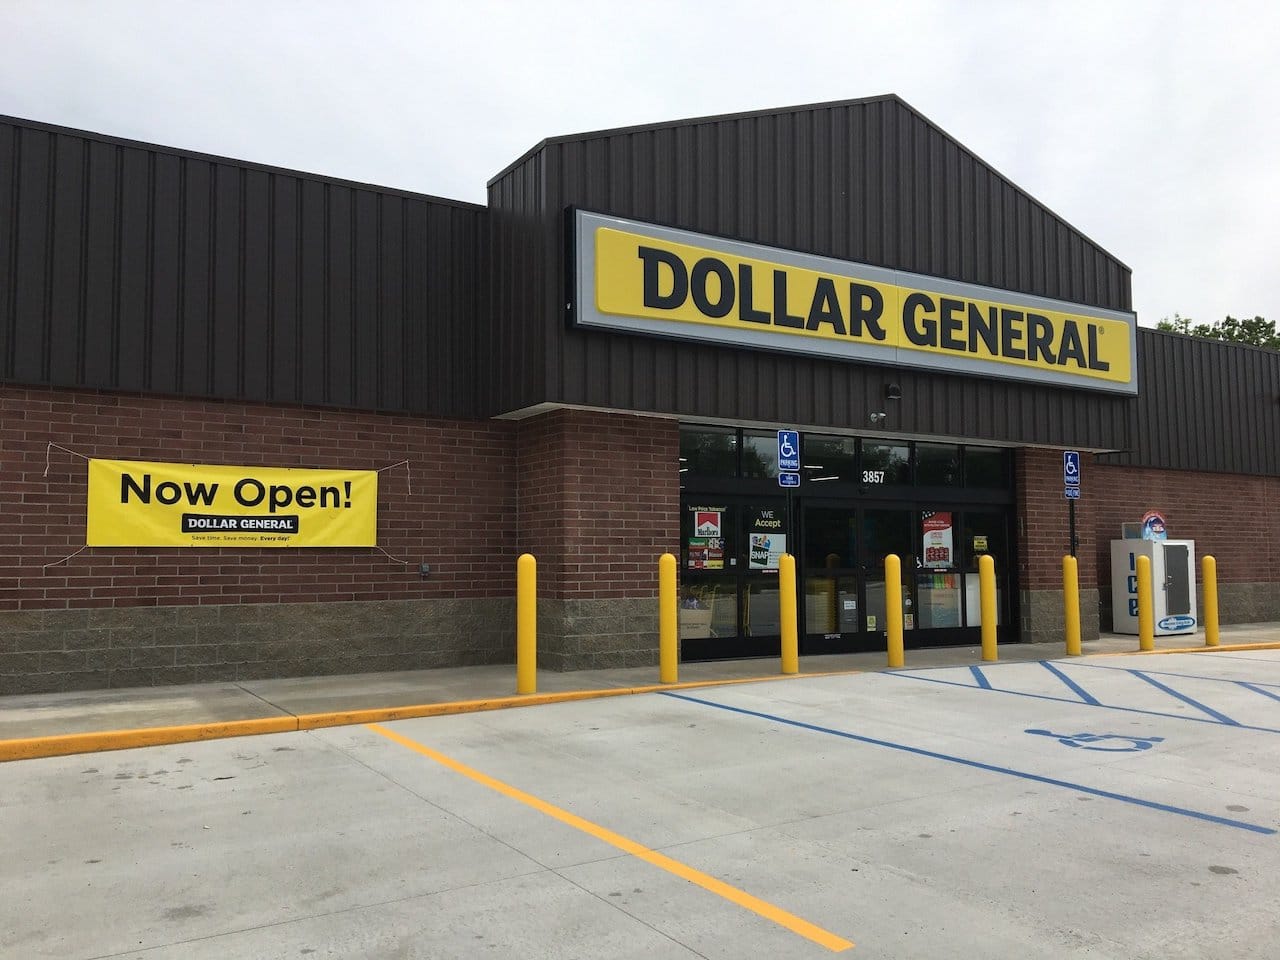 Dollar General Top South Florida Leases Q4 2018